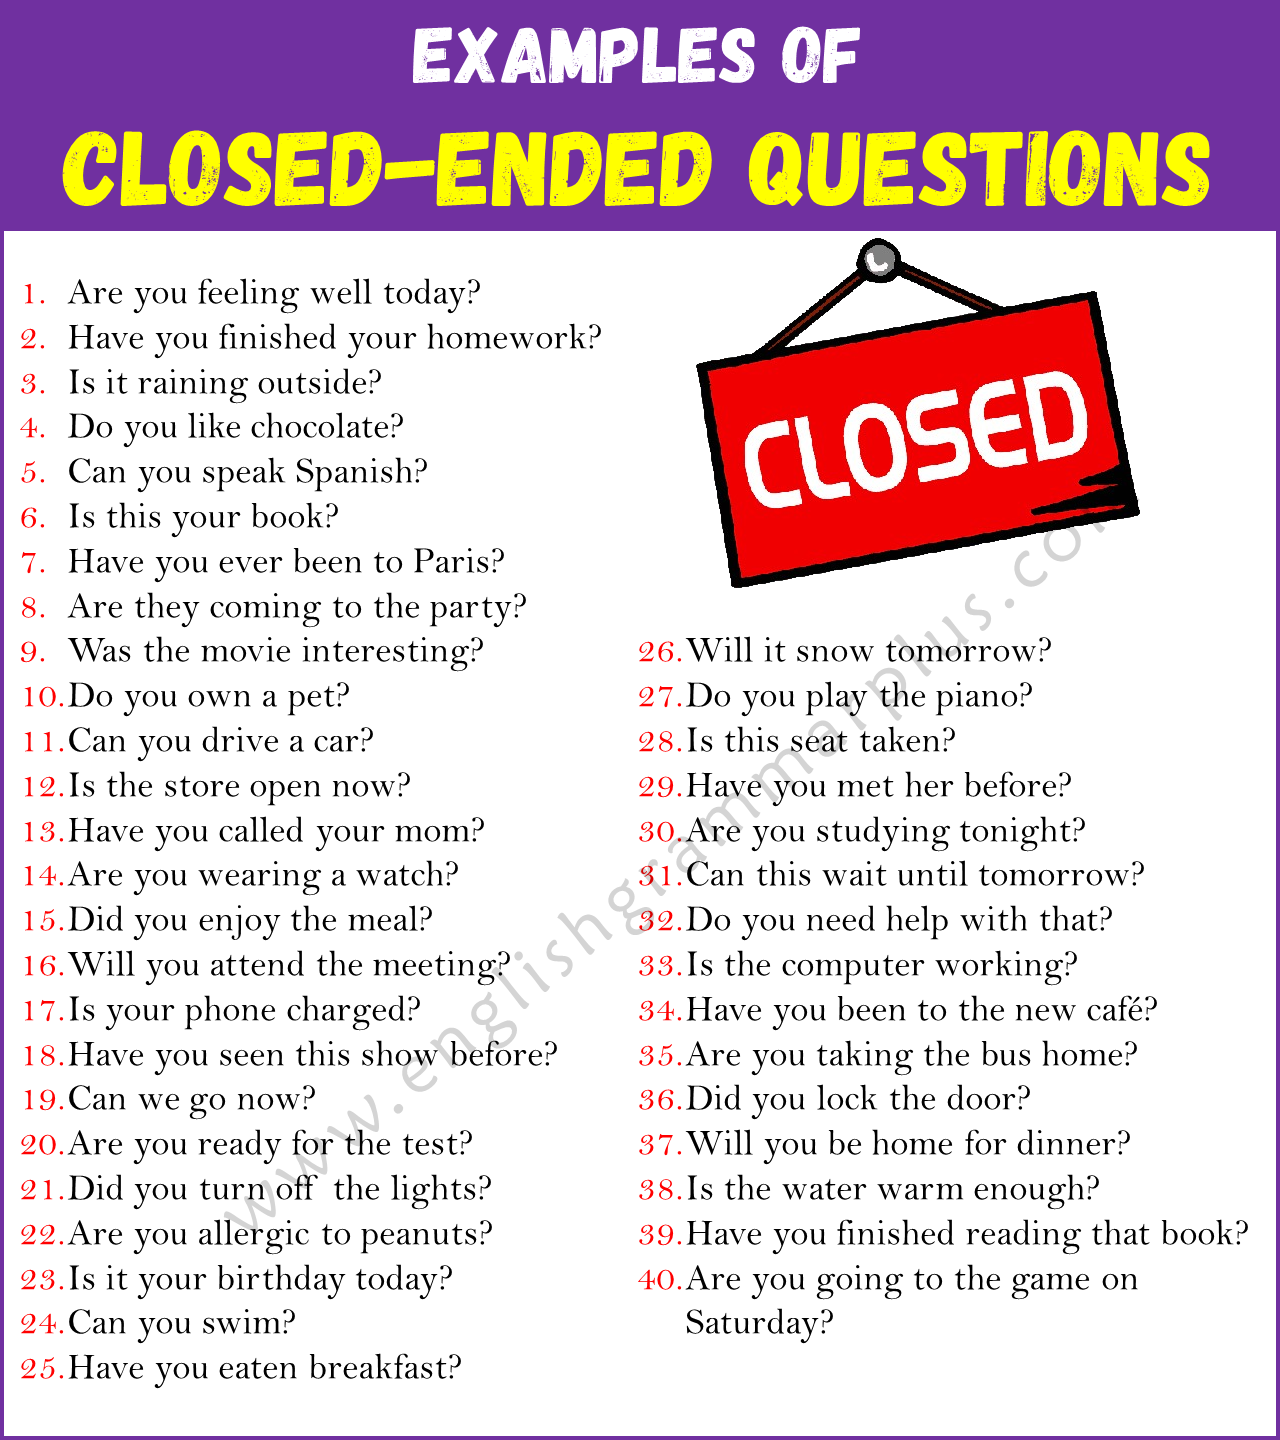 Examples of Closed Ended Questions in English